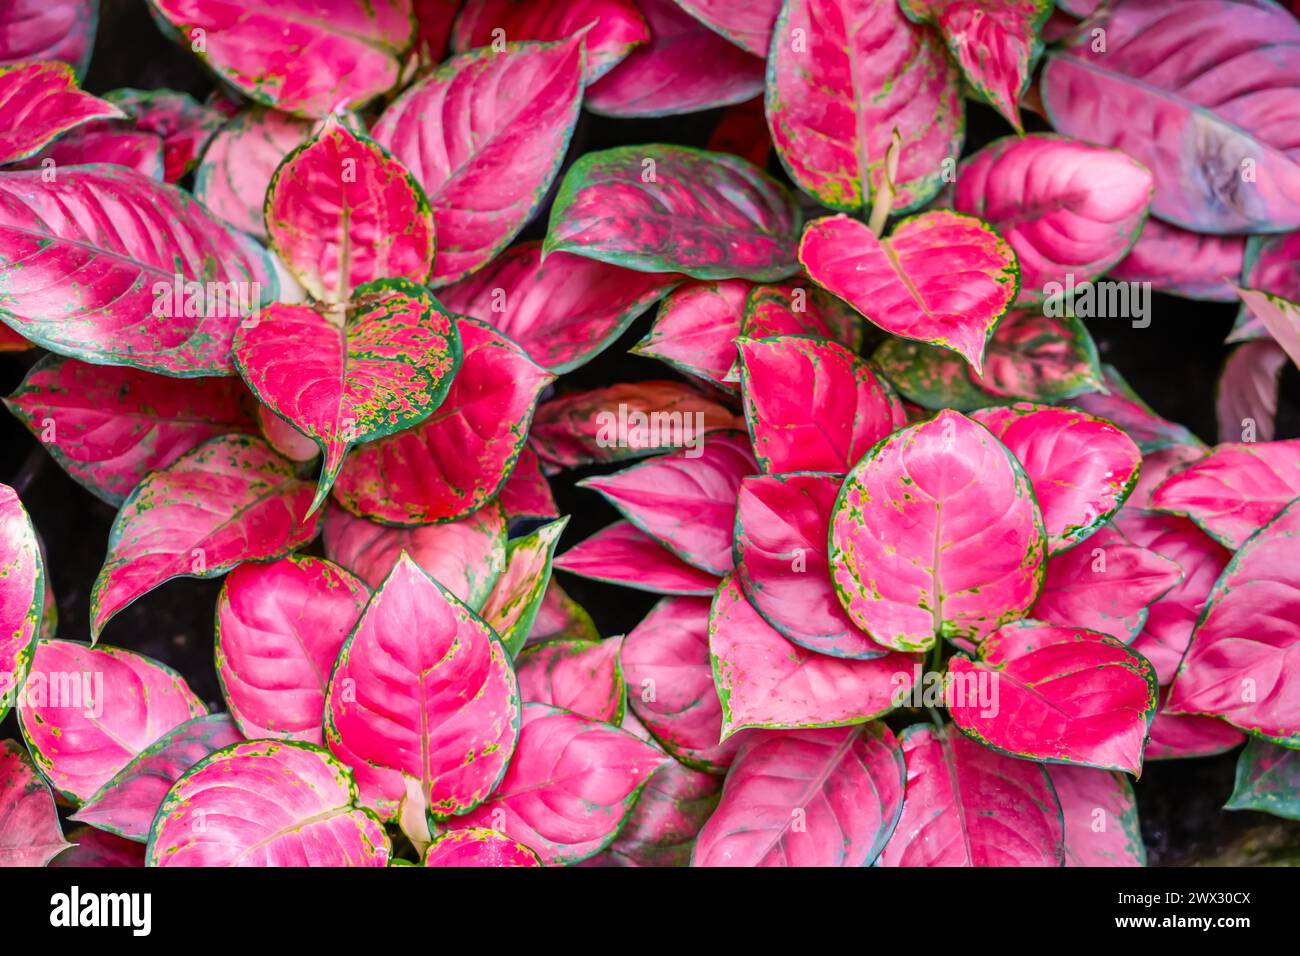 Red Aglaonema Plants in the Garden natural fresh foliage texture Stock Photo